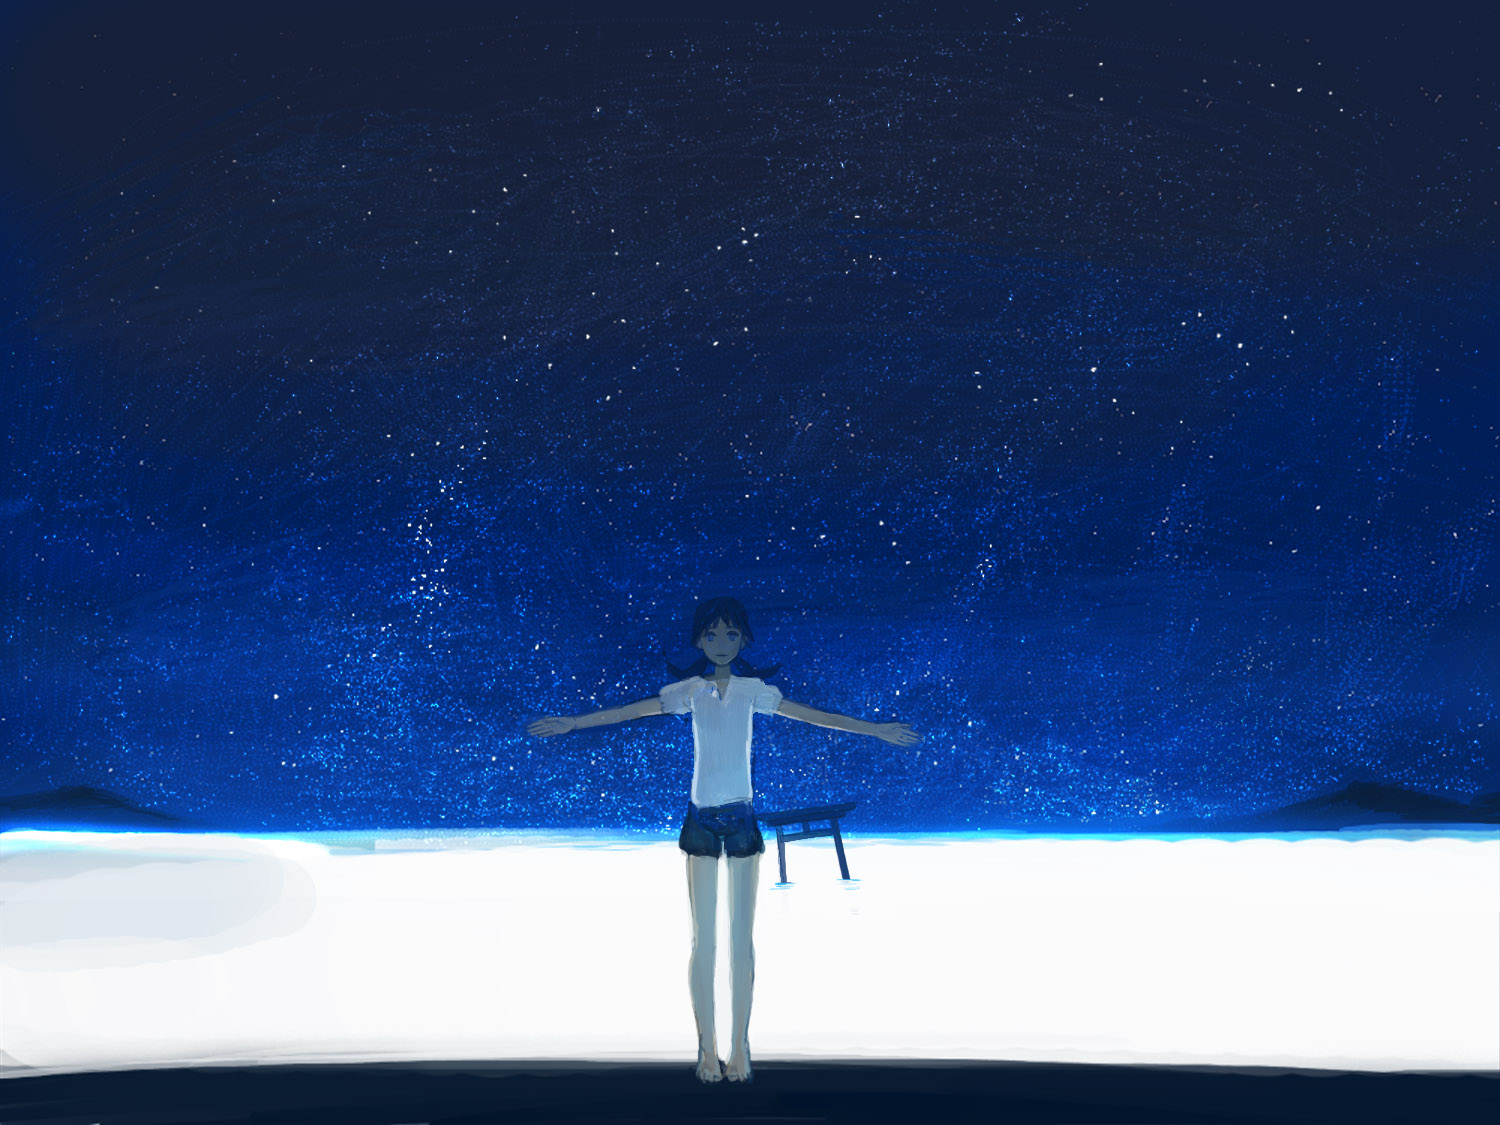 Anime Girl Standing Alone In Snow Wallpapers